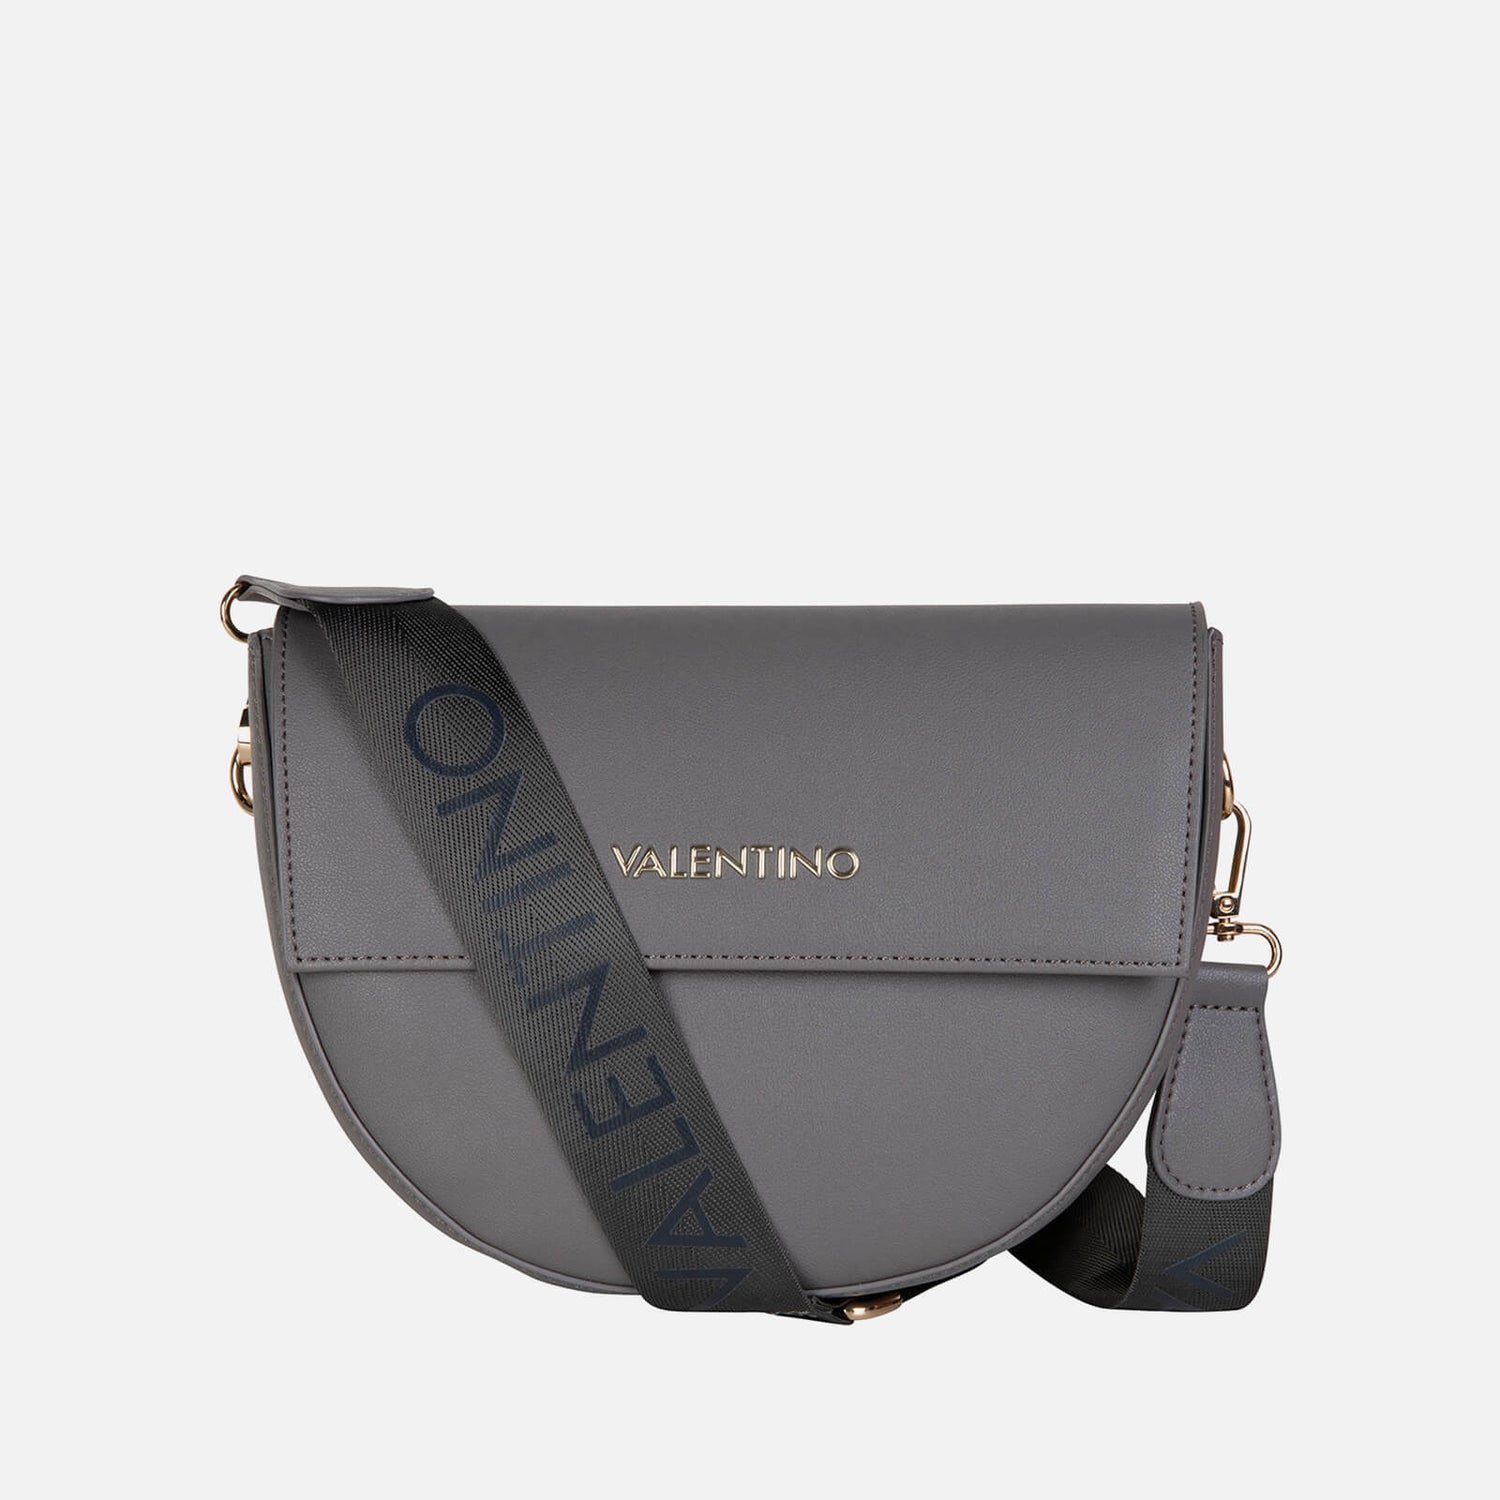 Valentino Bags faux leather shoulder bag